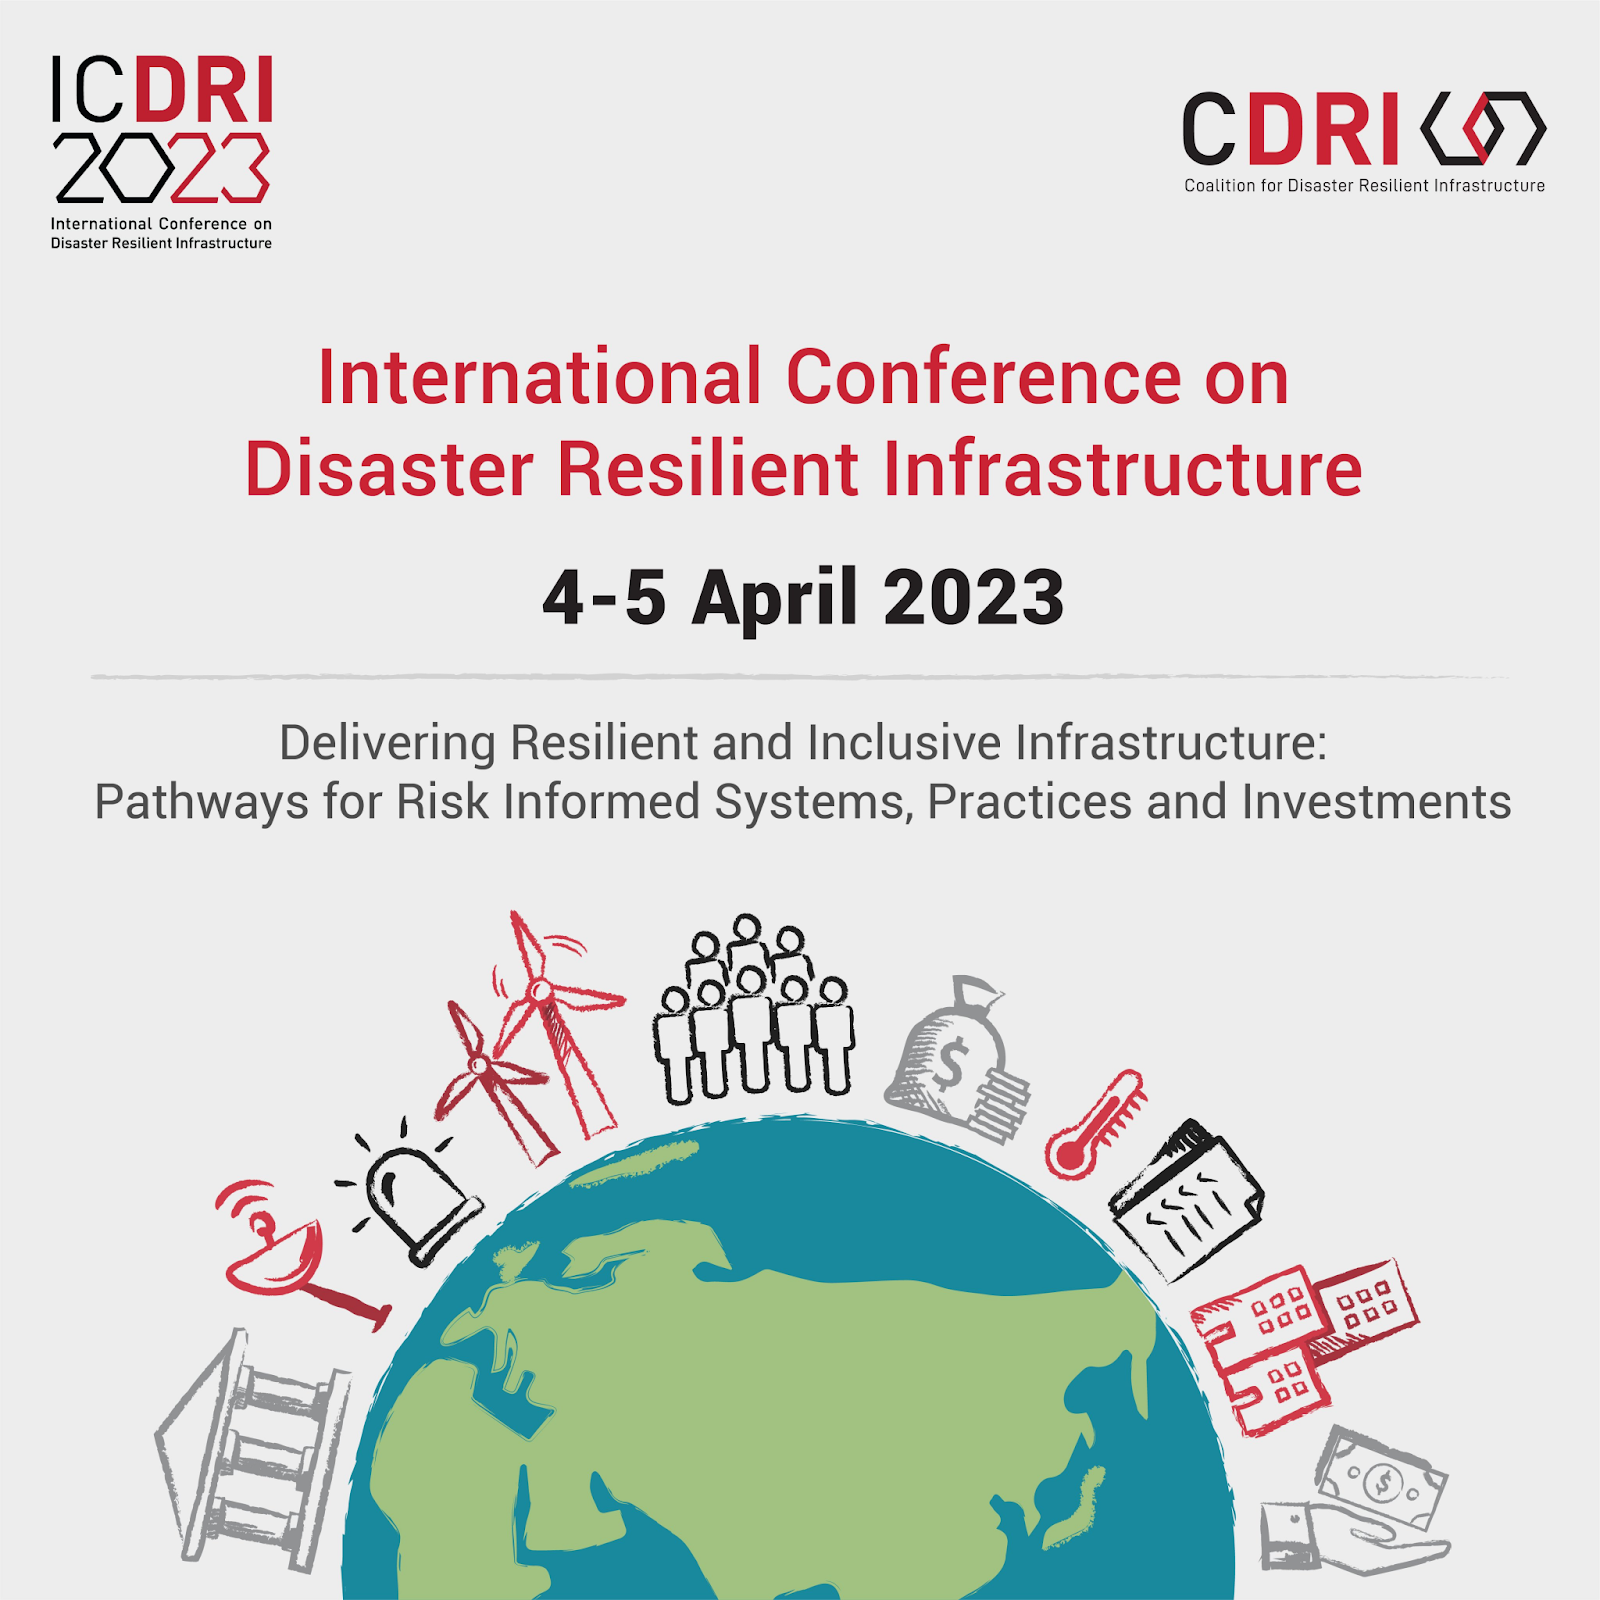 International Conference On Disaster Resilient Infrastructure or ICDRI